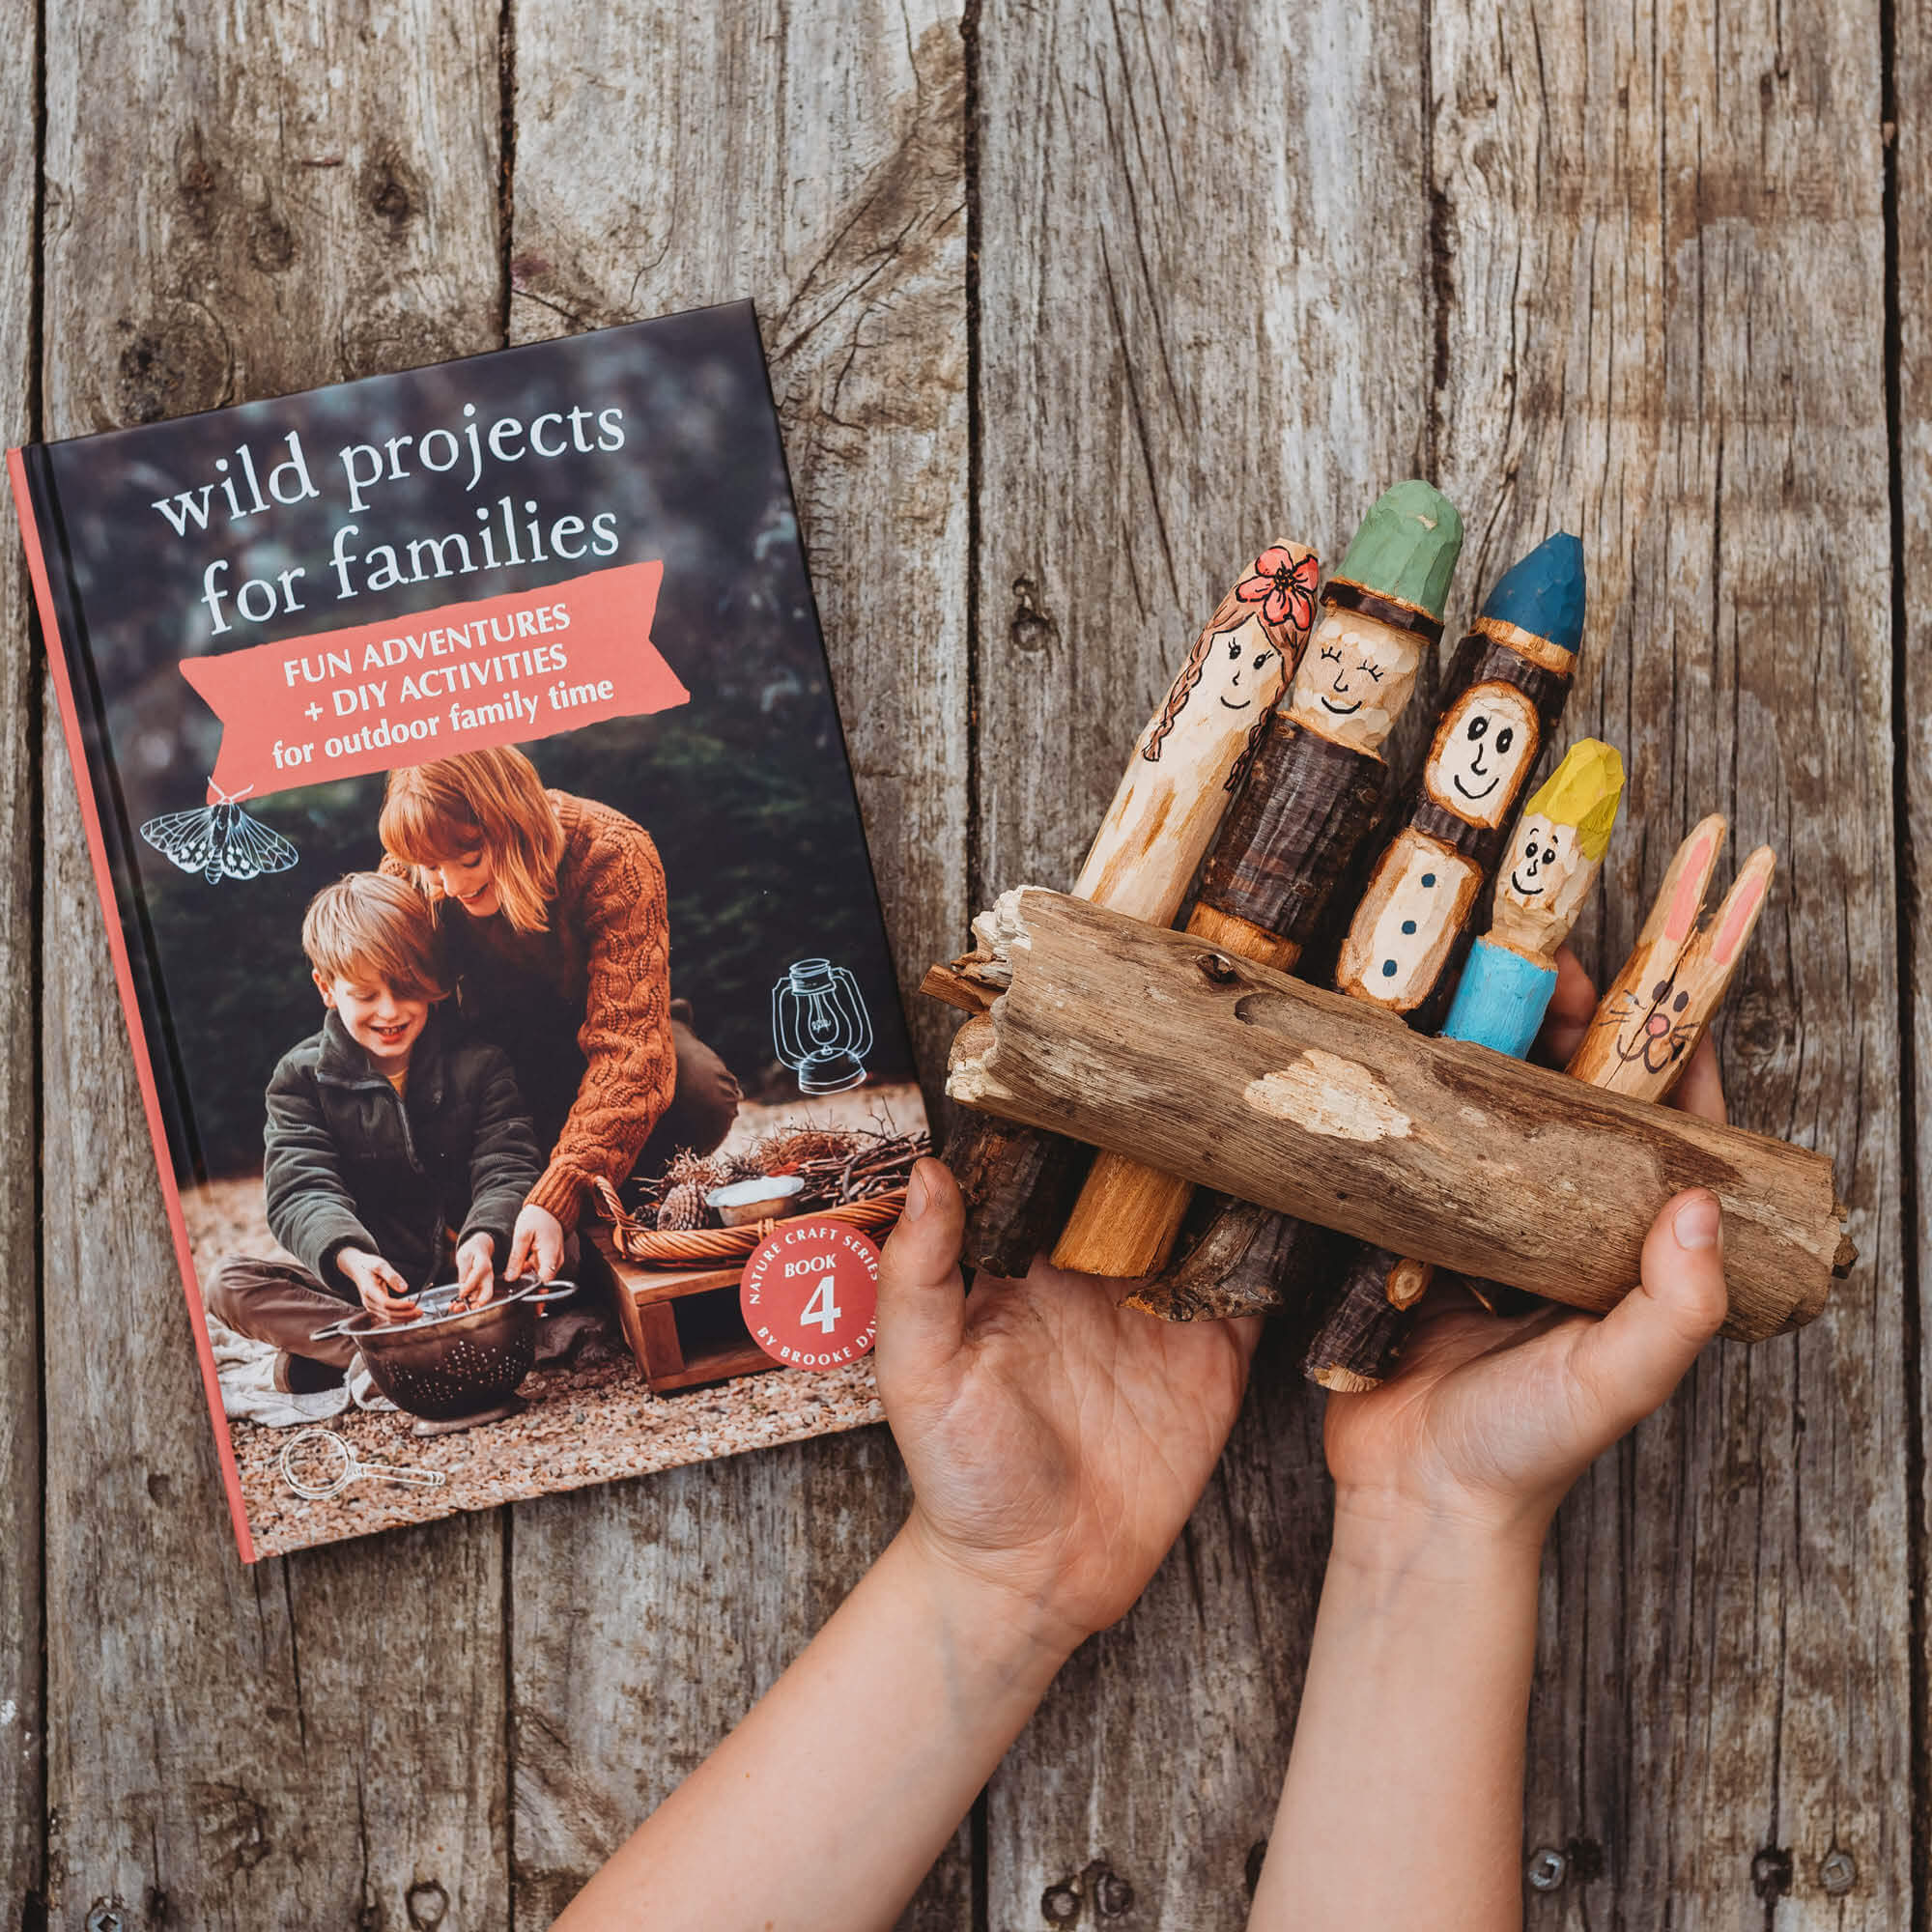 Whittled stick family from Real Tools Bundle by Your Wild Books includes Wild Projects for Families book, whittling knife, hand drill and fire starter.